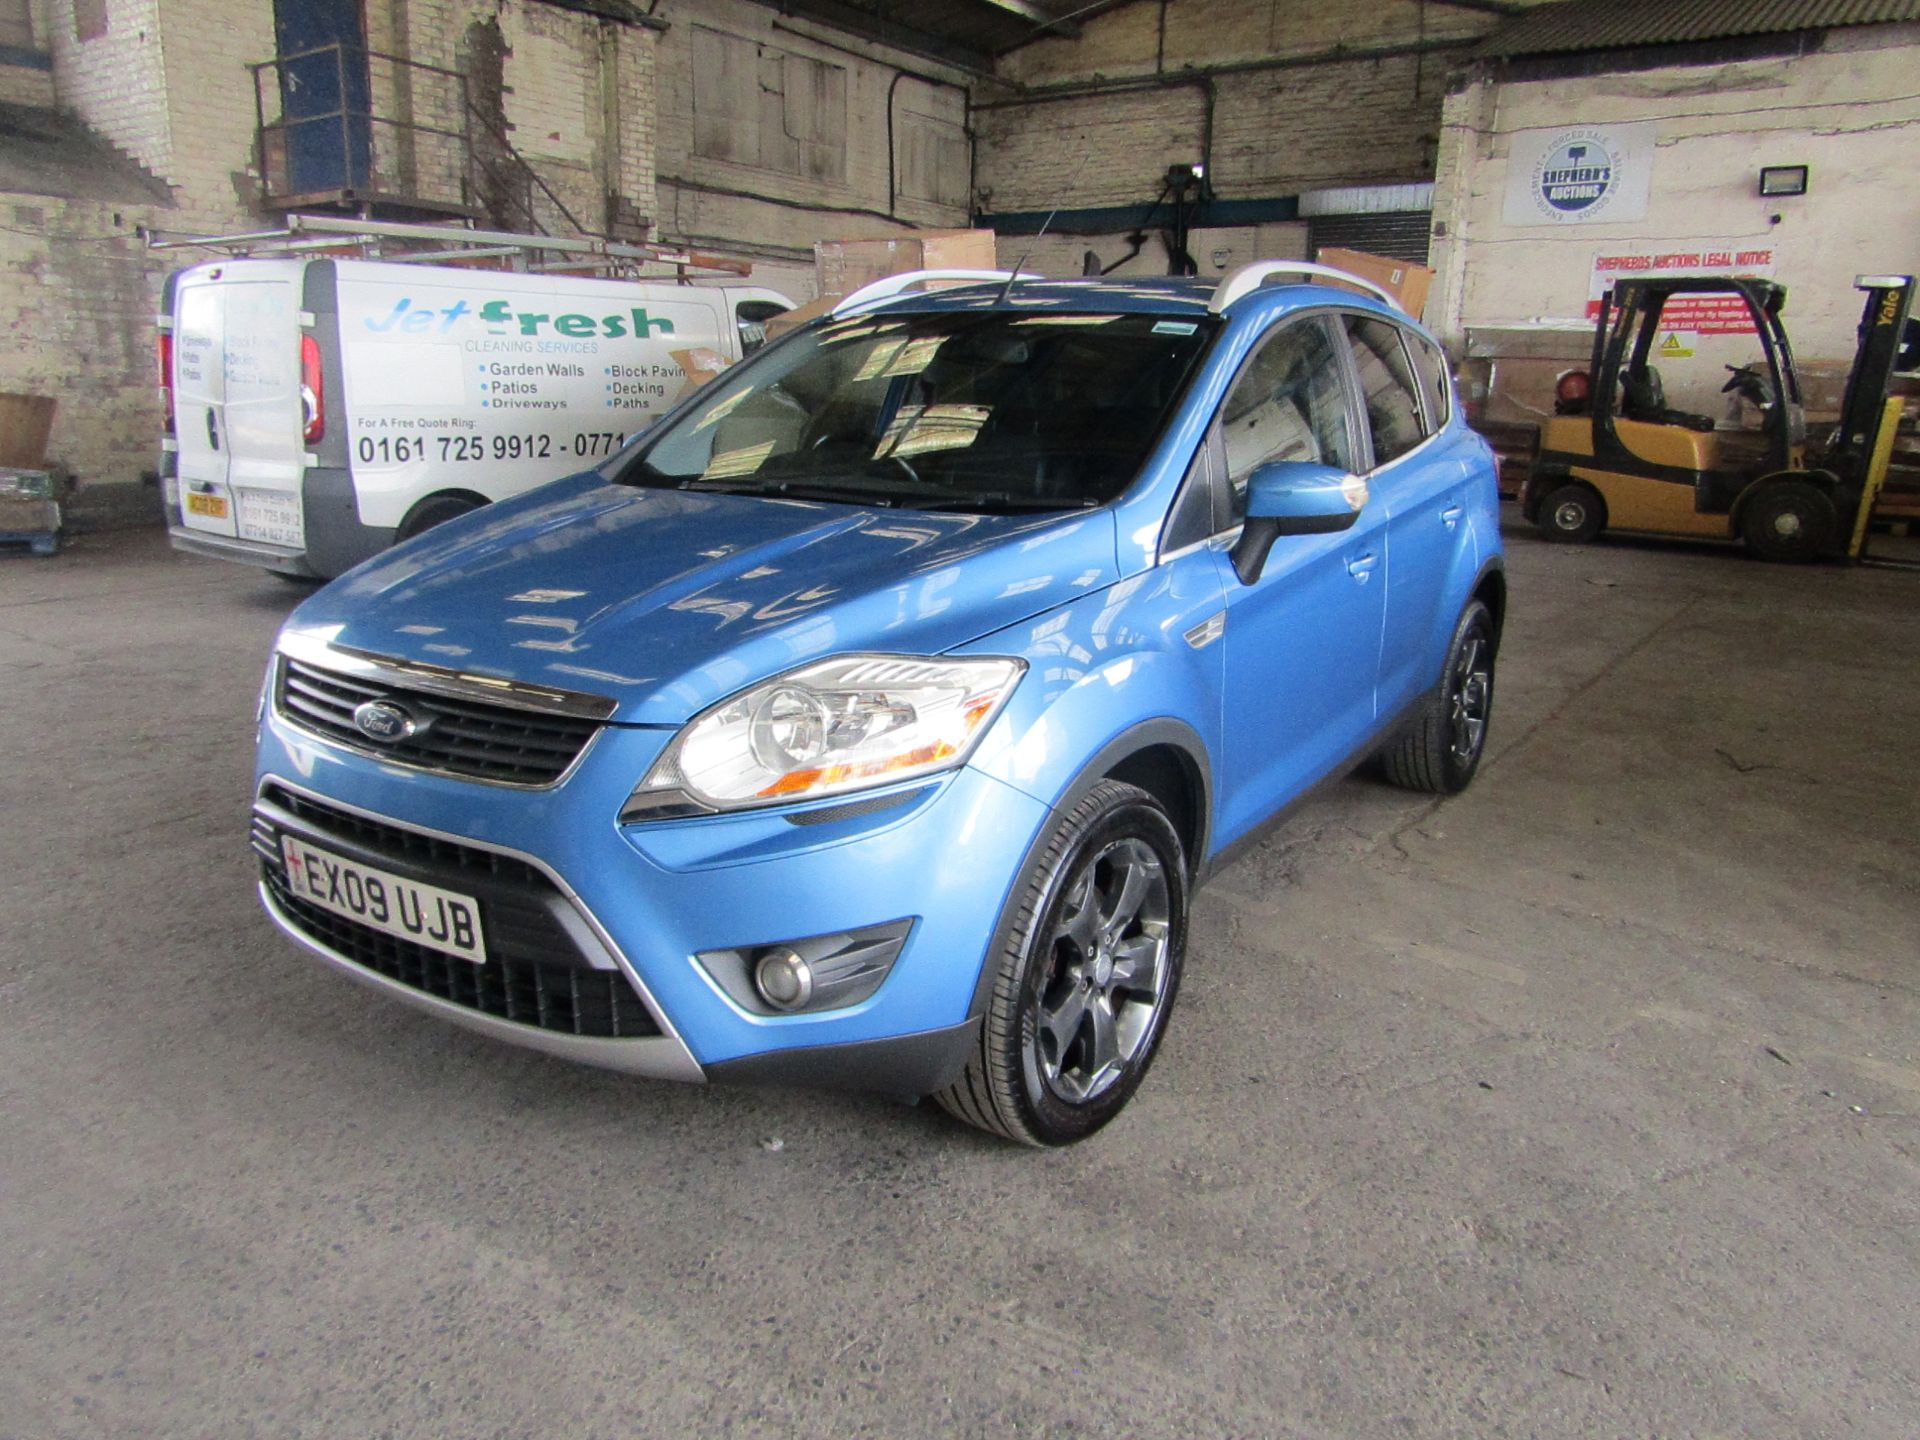 2009 Ford Kuga Titaniumÿ 2.0 TDCI, 144,437 miles (unchecked but appear to be in line with previous